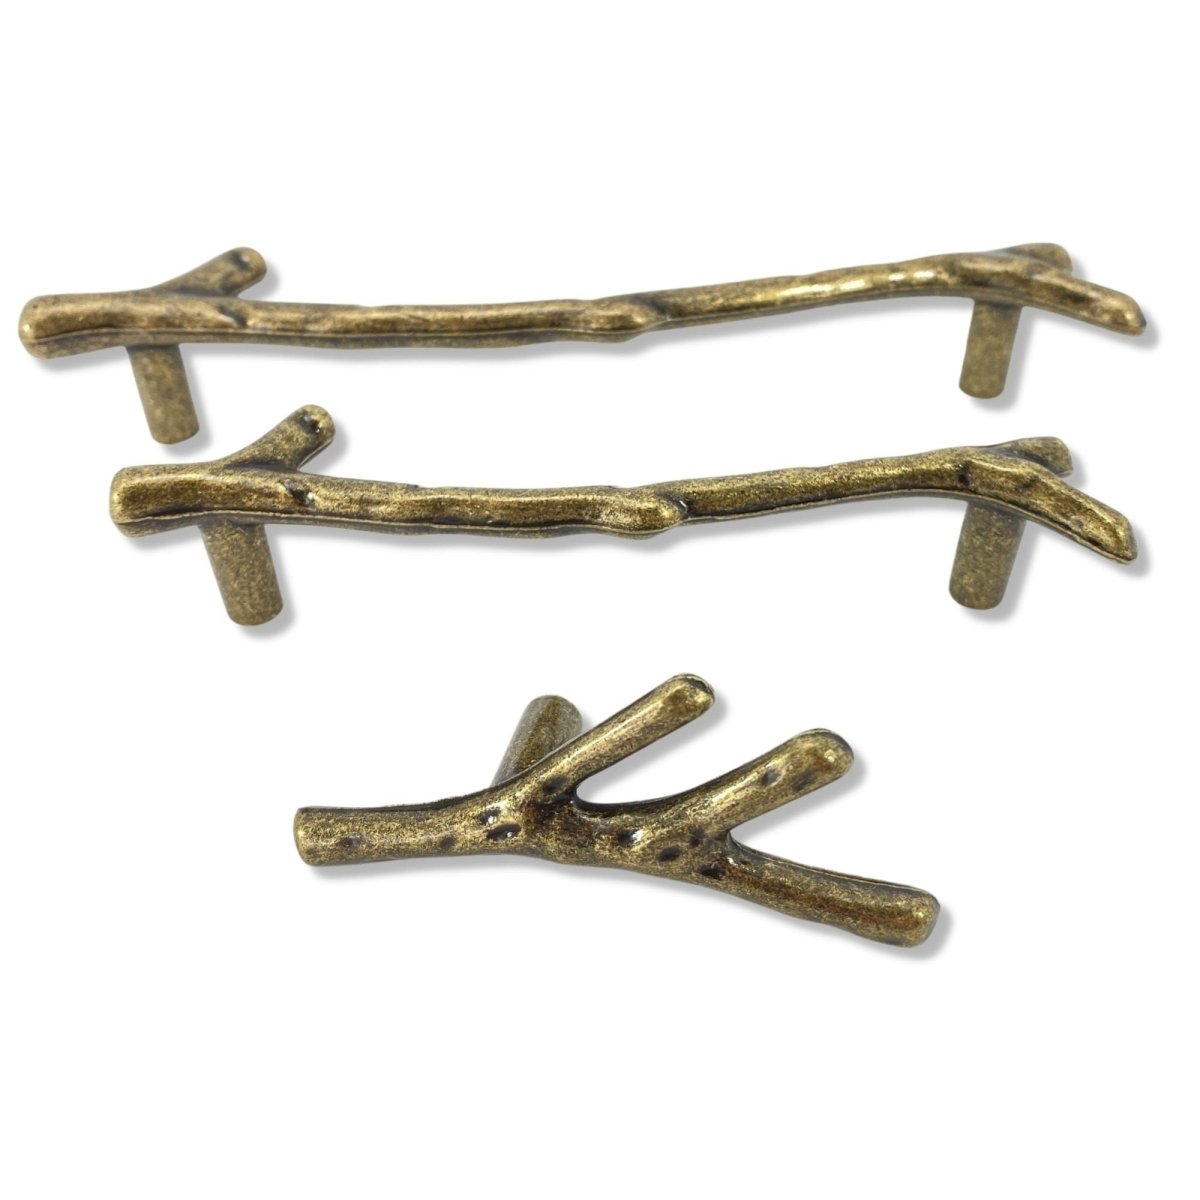 Branch Drawer Knobs and Pulls in Brass - DaRosa Creations